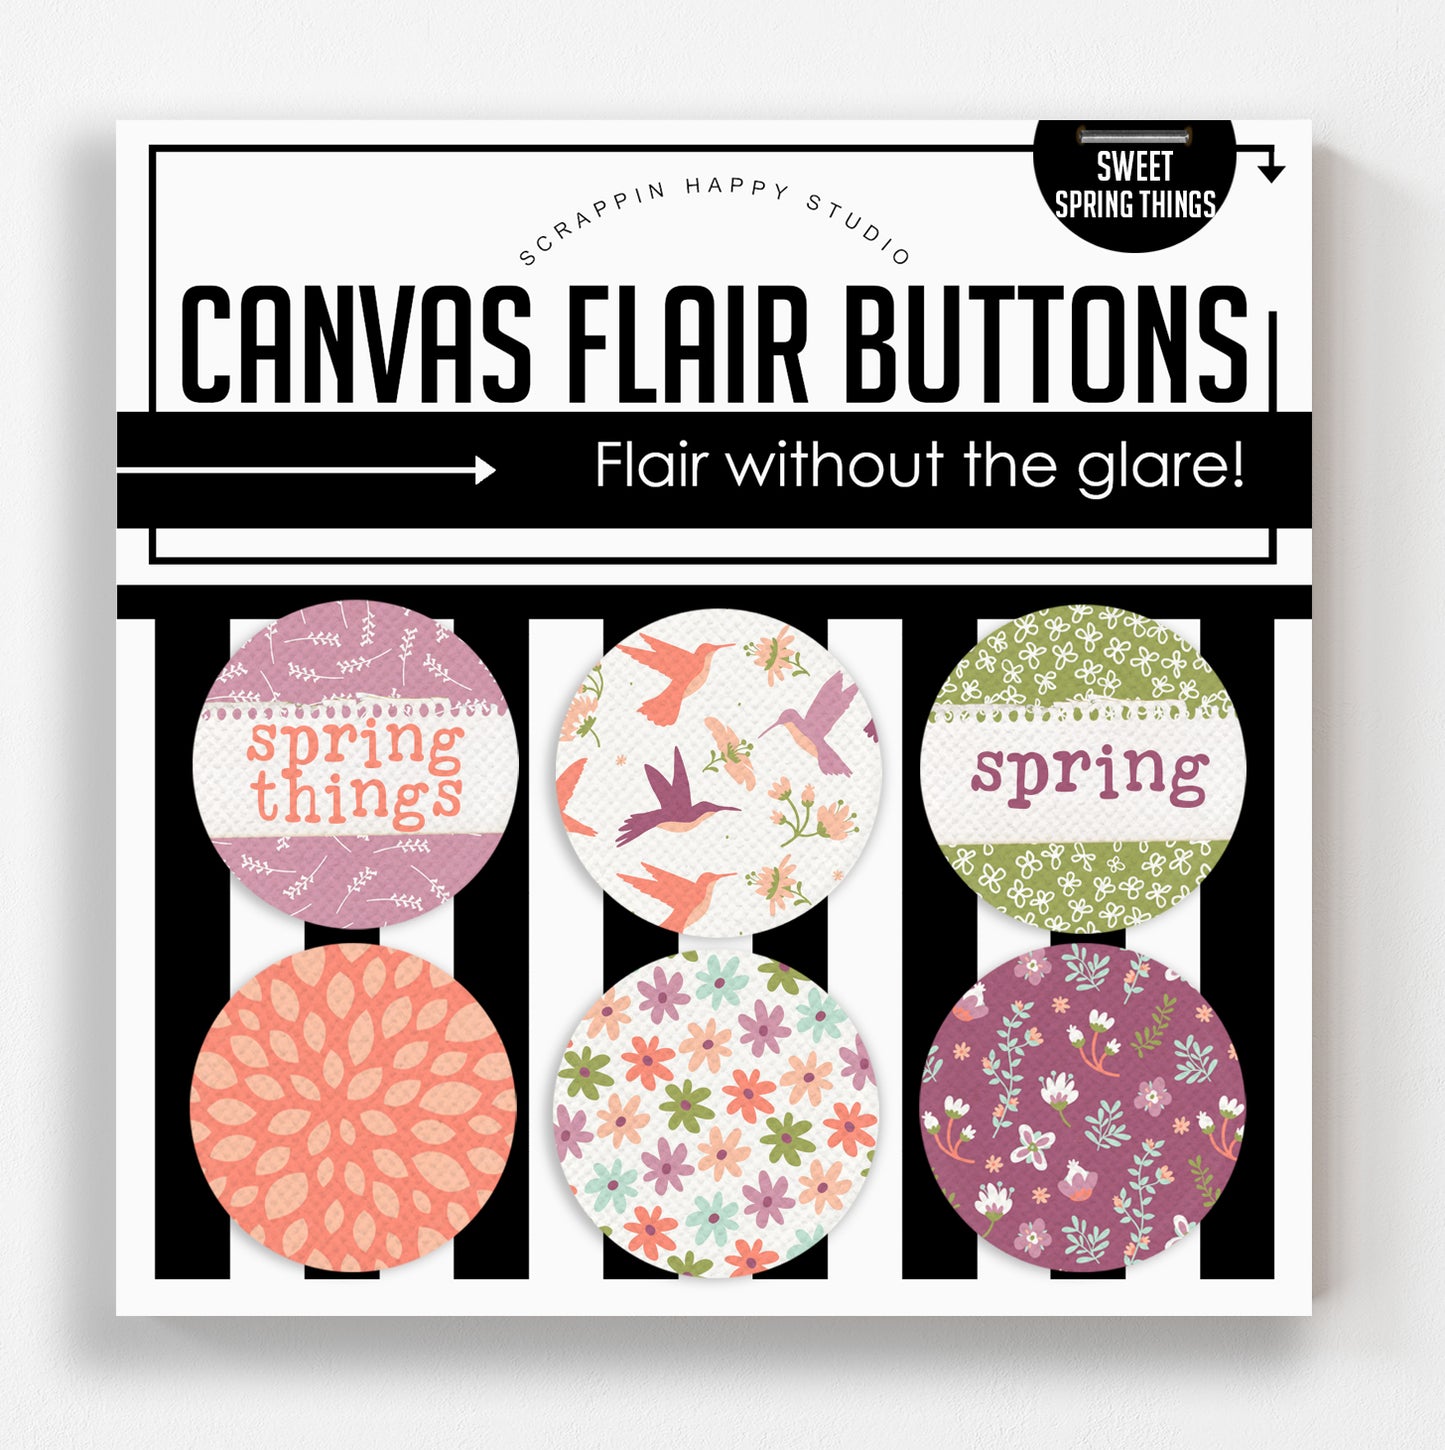 Sweet Spring Things Canvas Flair